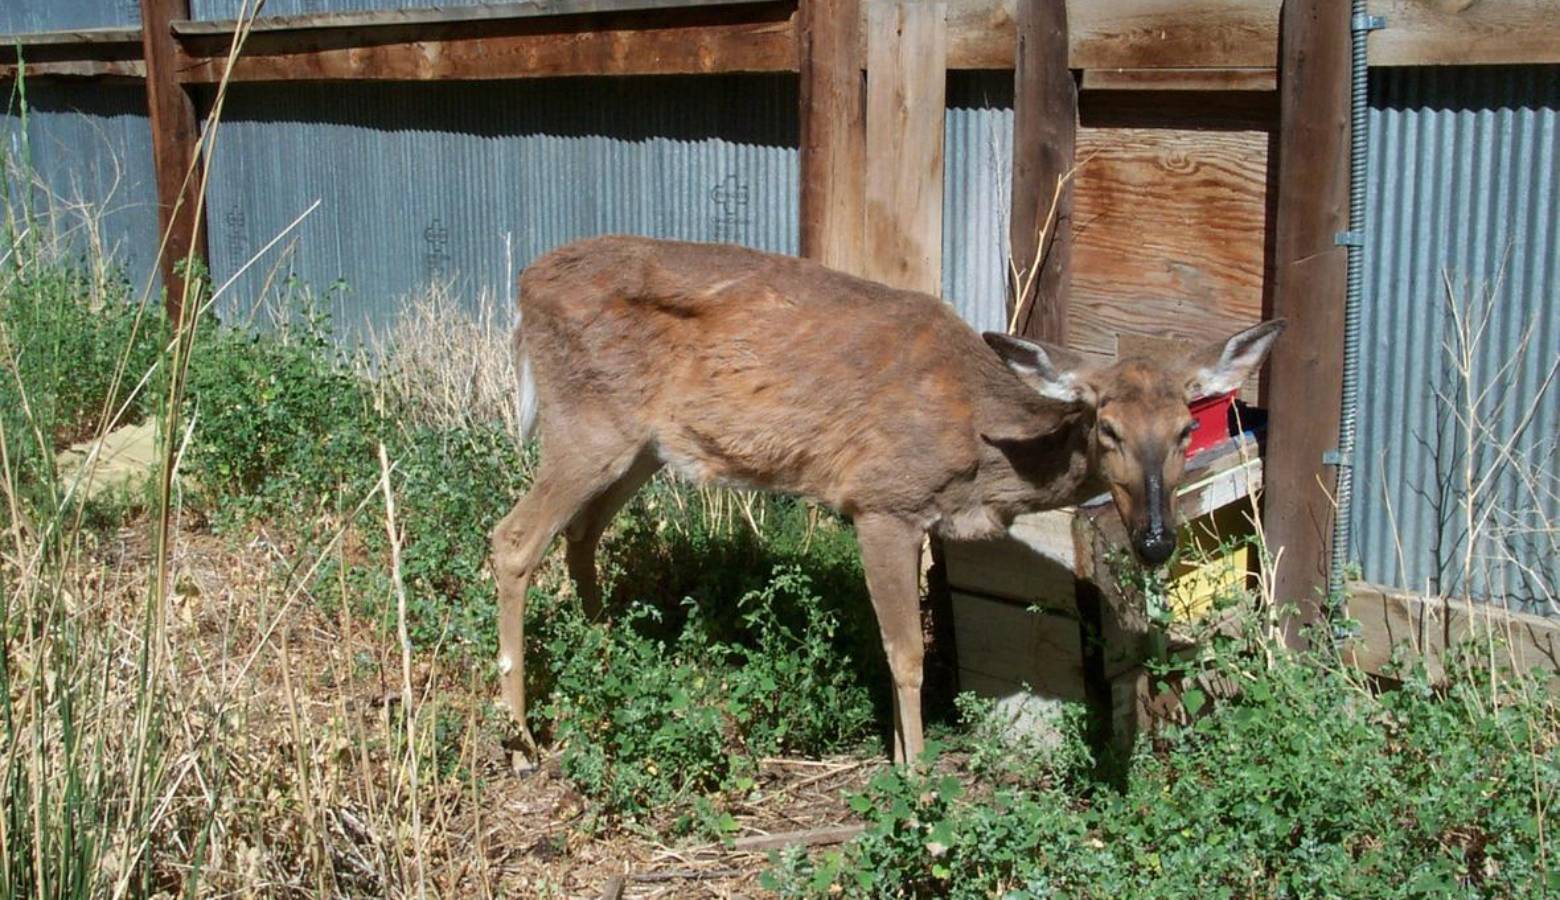 Weight loss is one of the few visable signs of chronic wasting disease (Terry Kreeger, Wyoming Game and Fish and Chronic Wasting Disease Alliance)